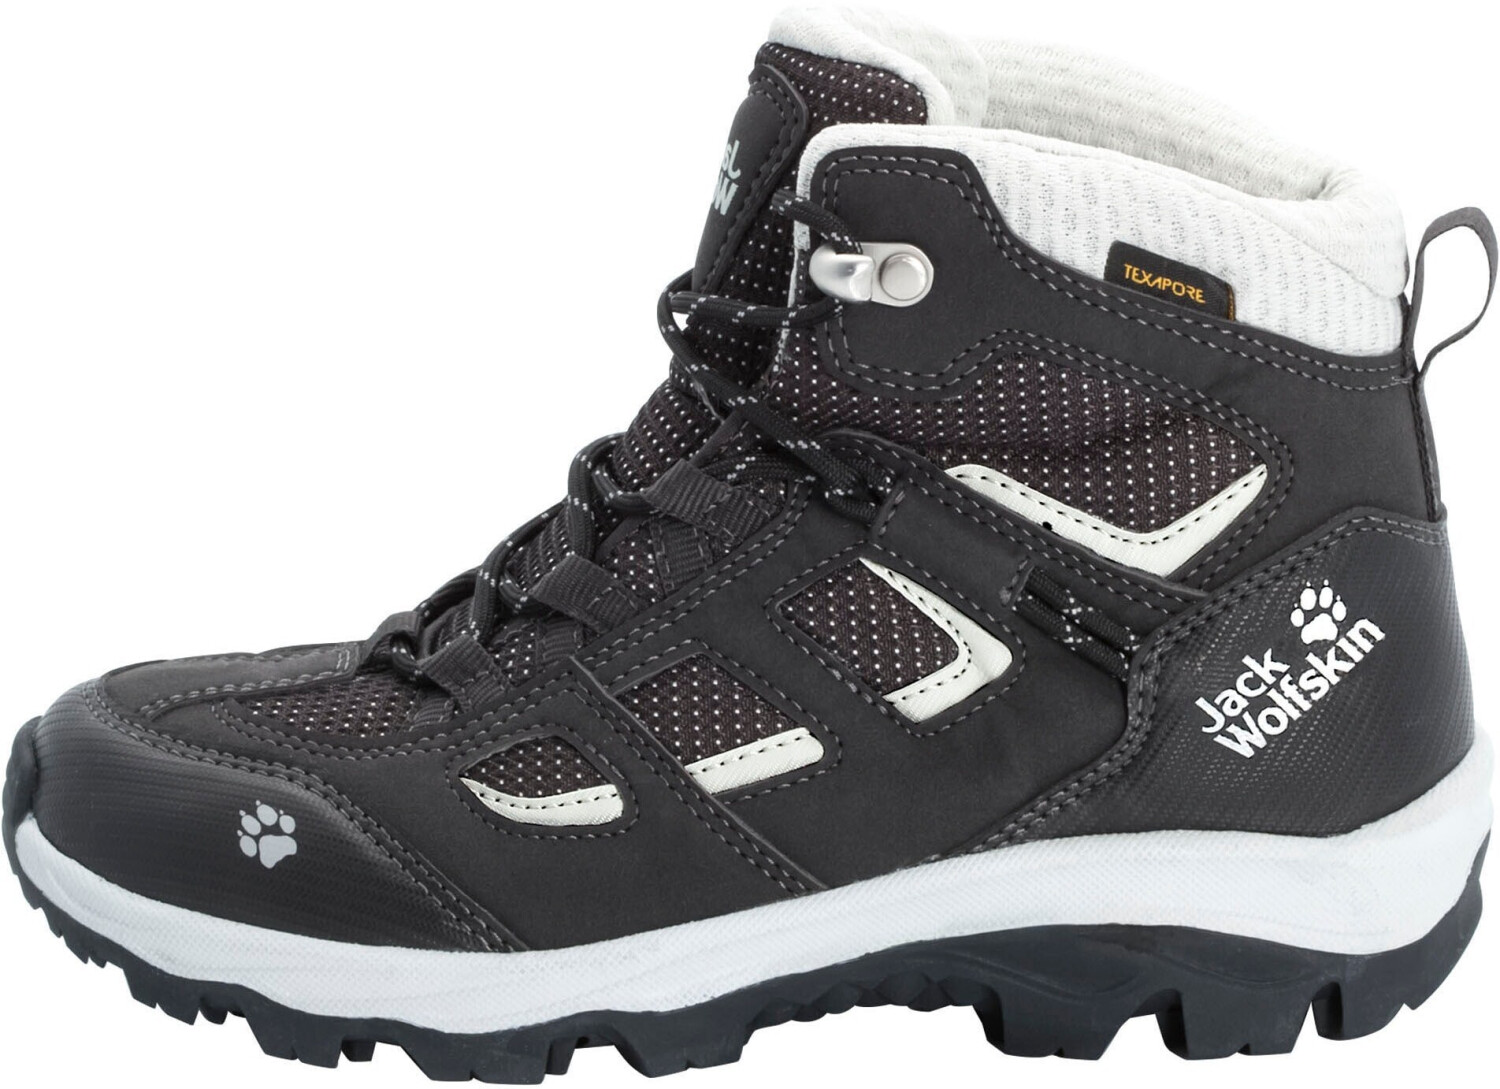 Buy Jack Wolfskin Vojo Texapore Best Deals (Today) Mid (4042181) from £34.94 on – Kids